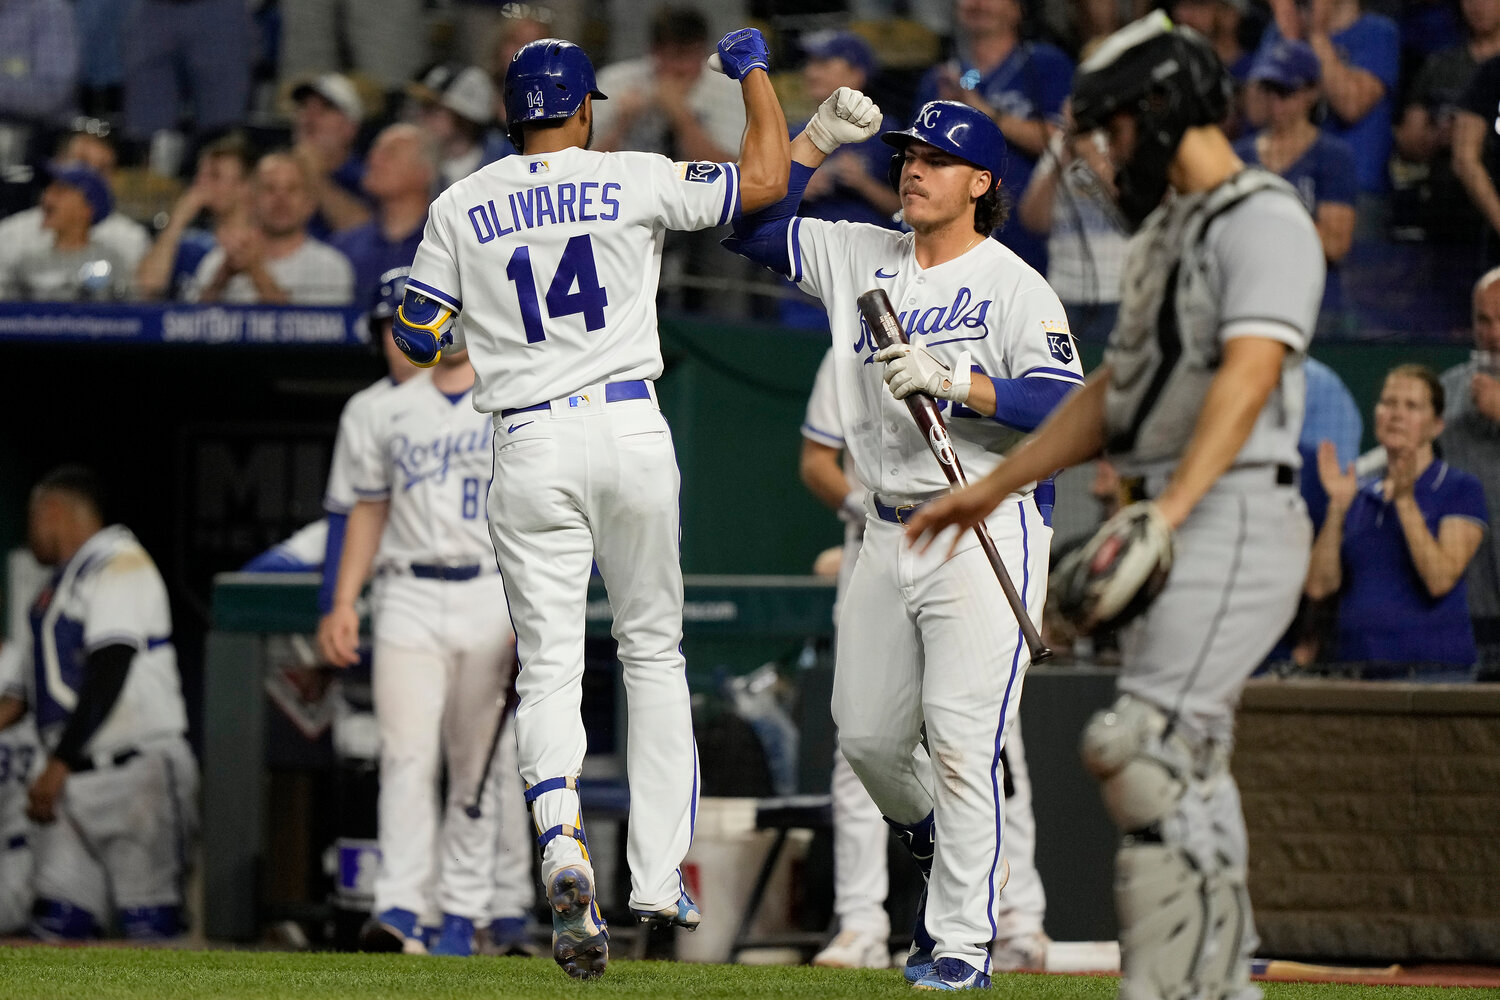 Kansas City Royals' Edward Olivares (14) celebrates with Nick Pratto after hitting a home run during the seventh inning of their game against the Chicago White Sox on Wednesday in Kansas City, Mo. (AP Photo/Charlie Riedel)